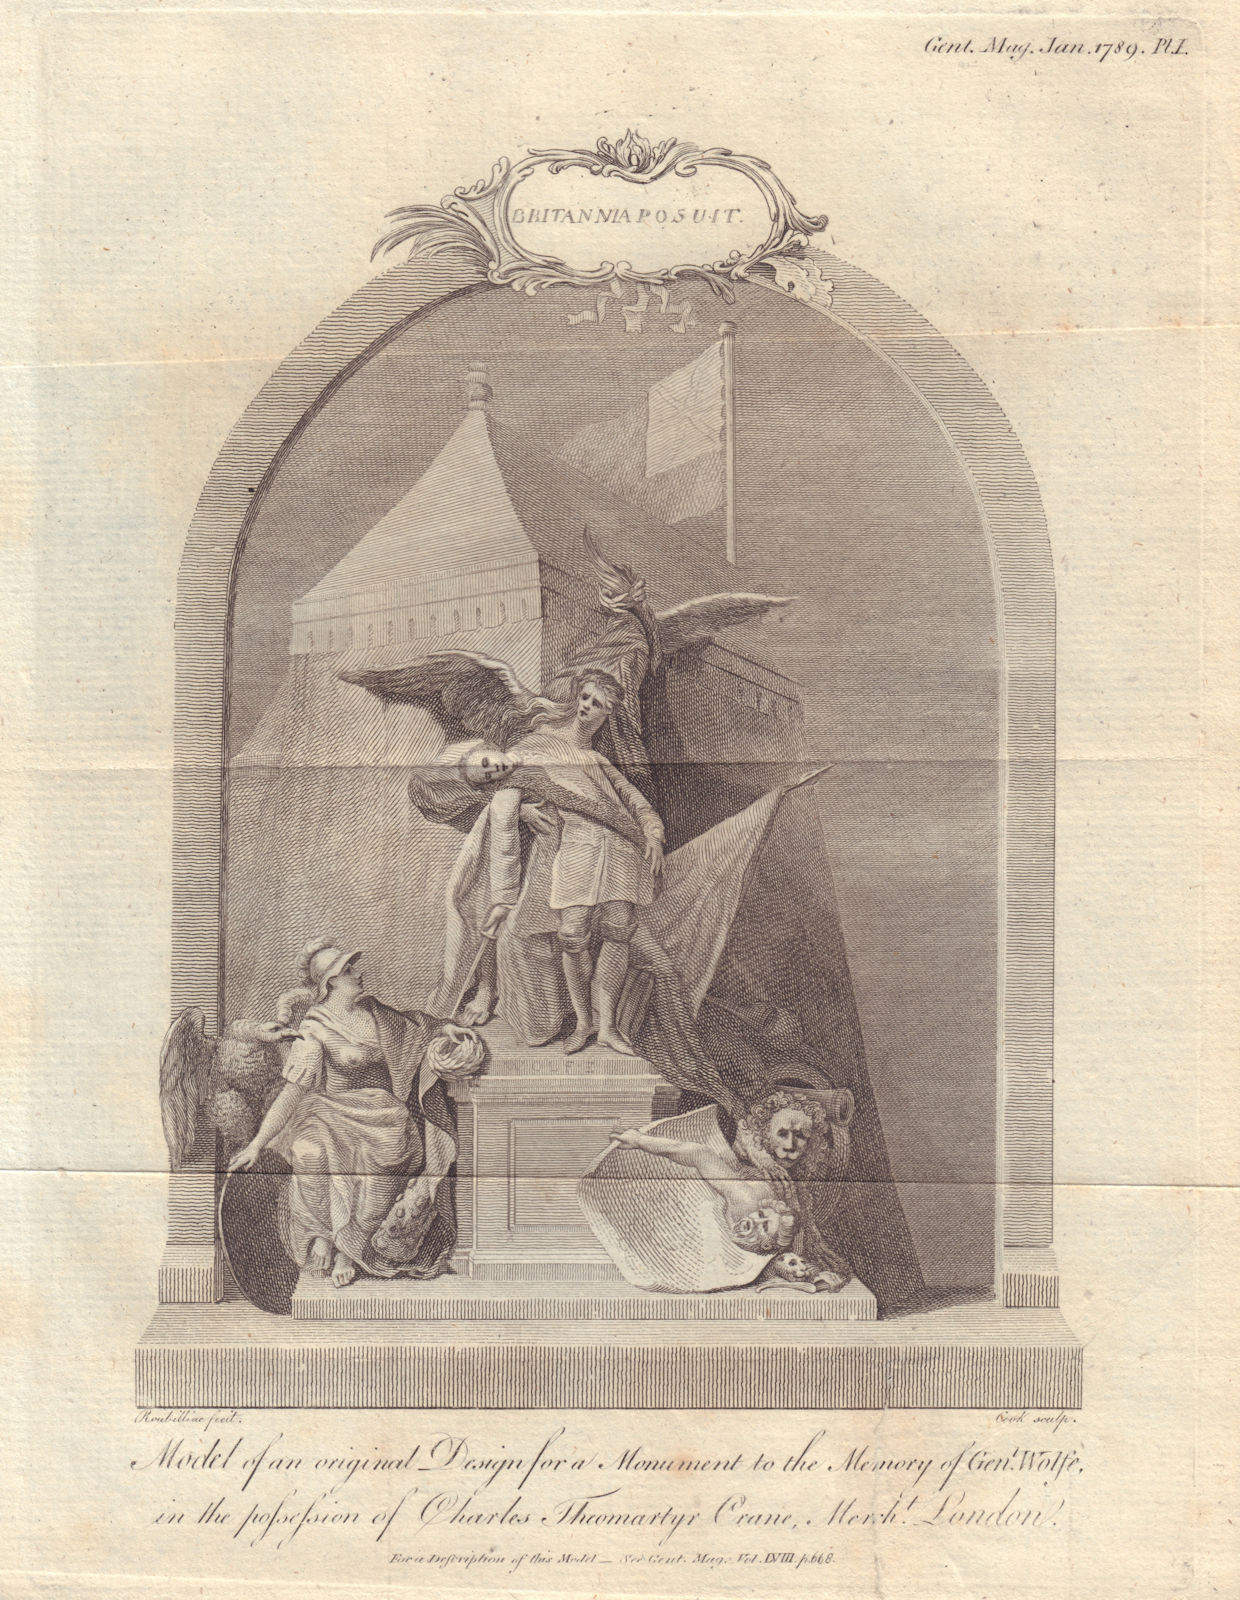 Model of an original design for a Monument to the Memory of General Wolfe 1789